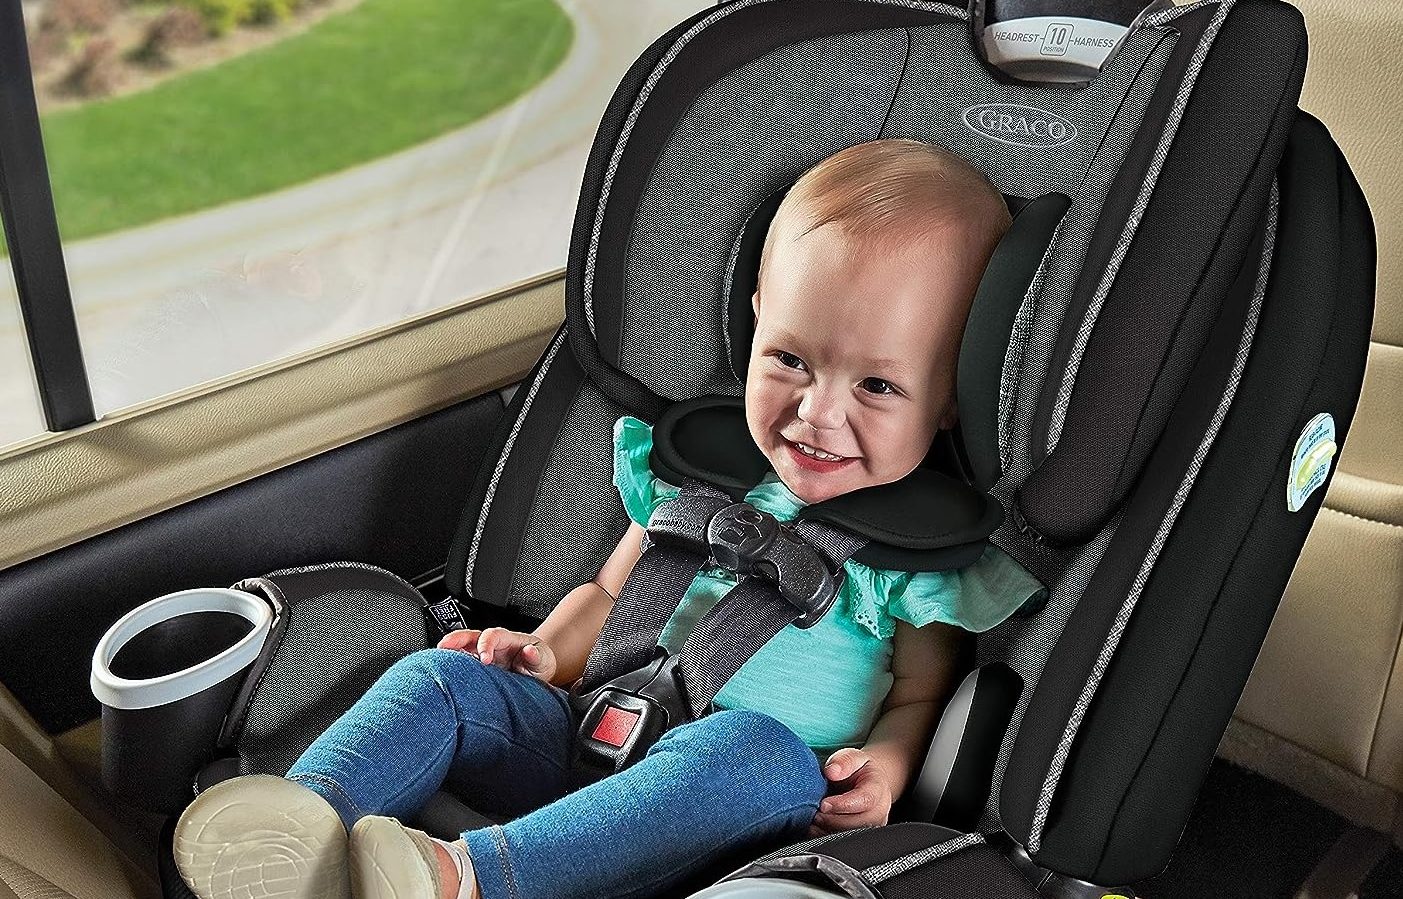 Shop Graco car seats 25% off for 's October Prime Day